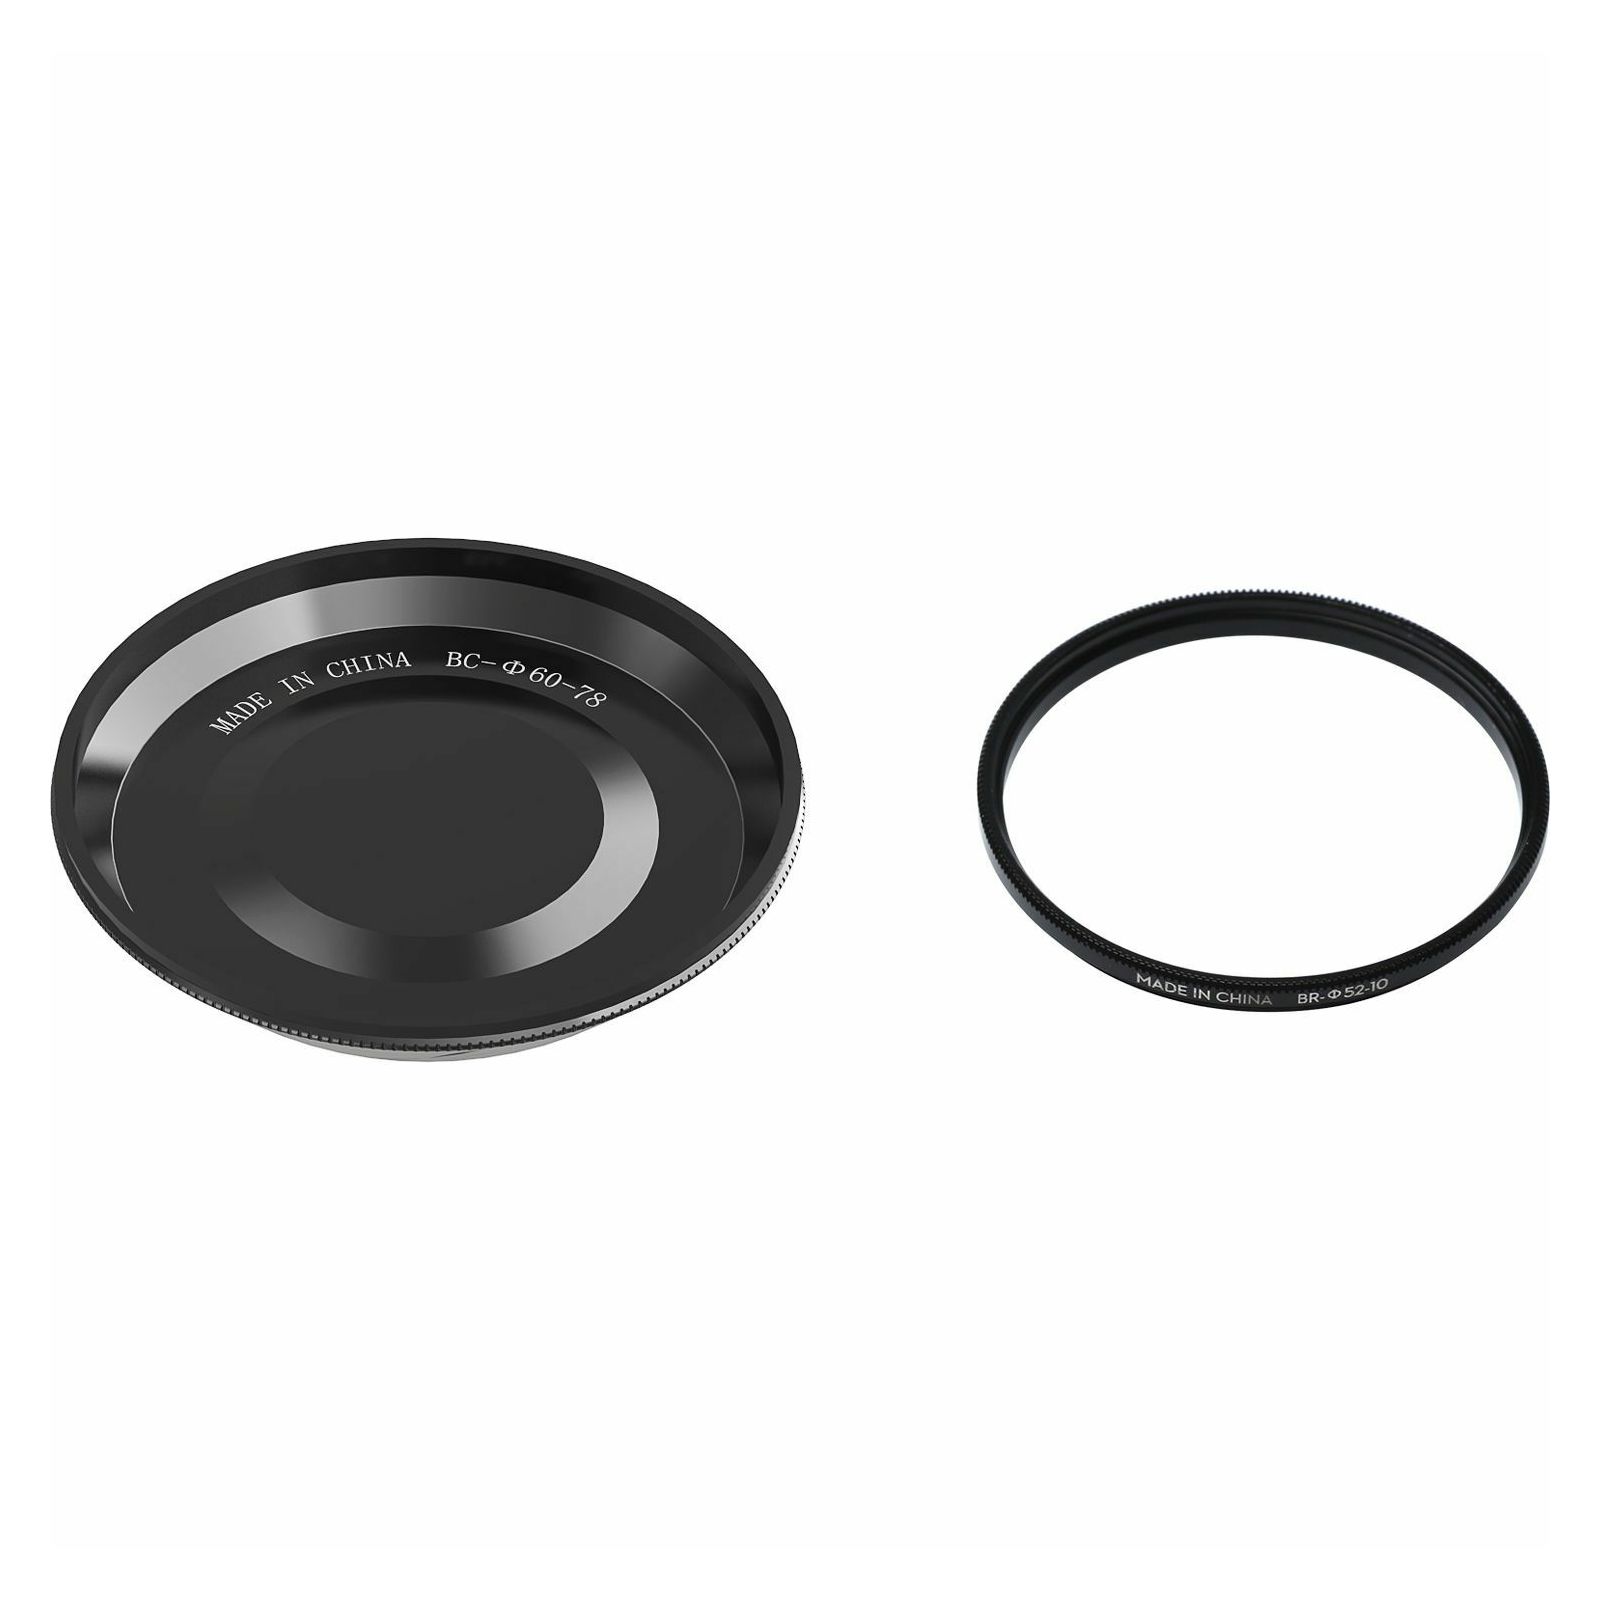 DJI Zenmuse X5S Spare Part 05 Balancing Ring for Olympus 9-18mm F/4.0-5.6 ASPH Zoom Lens